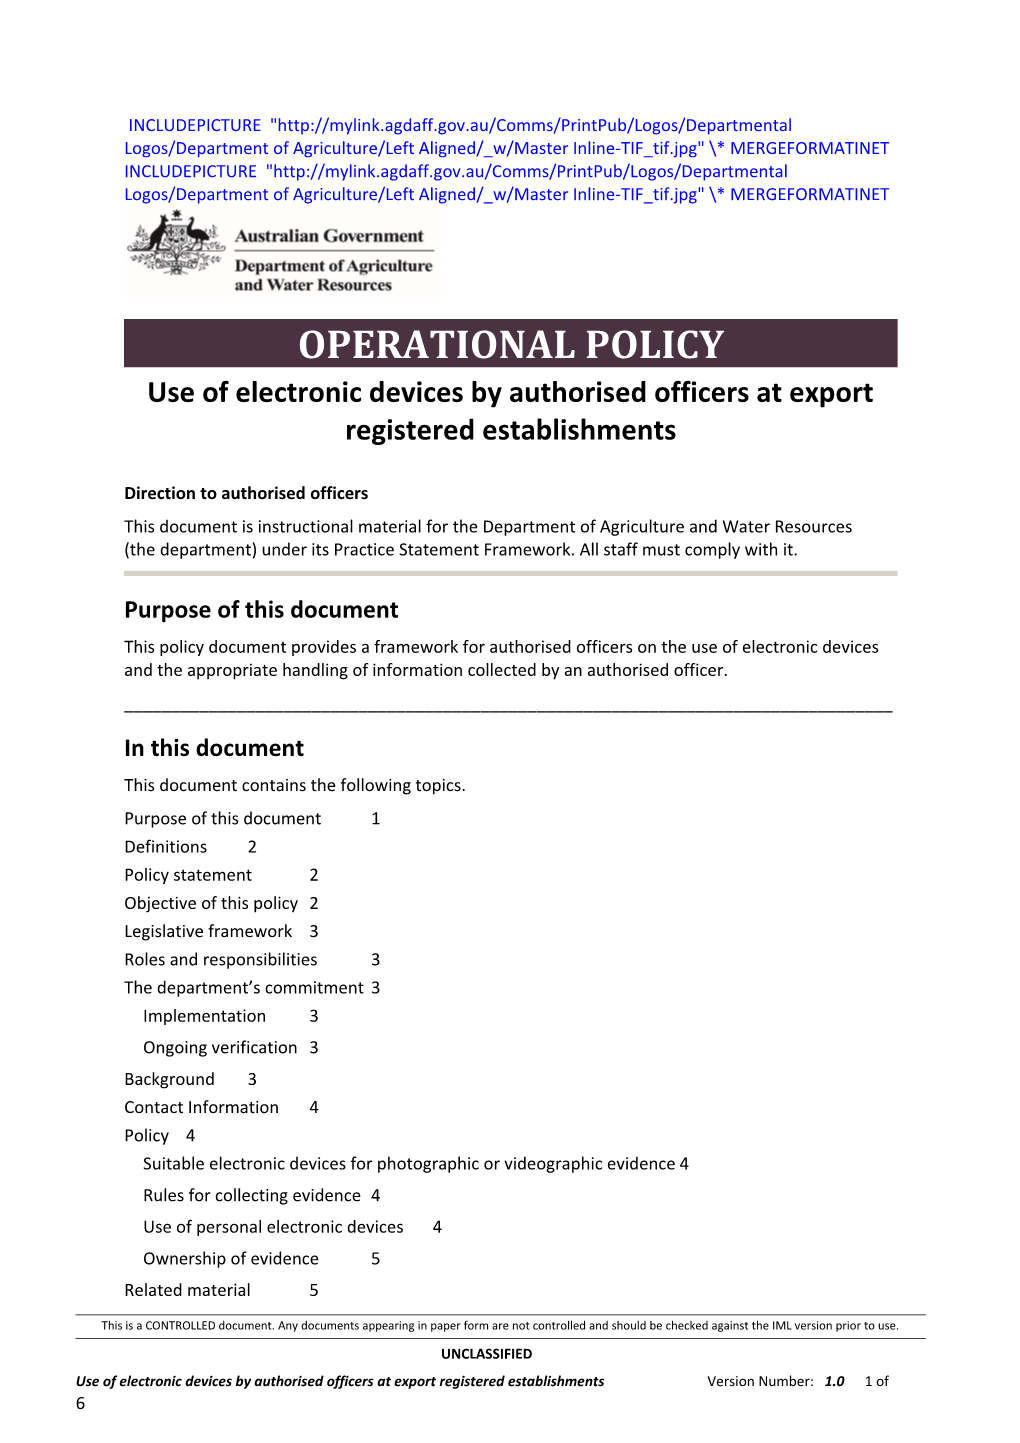 Use Ofelectronic Devices by Authorised Officers at Export Registered Establishments